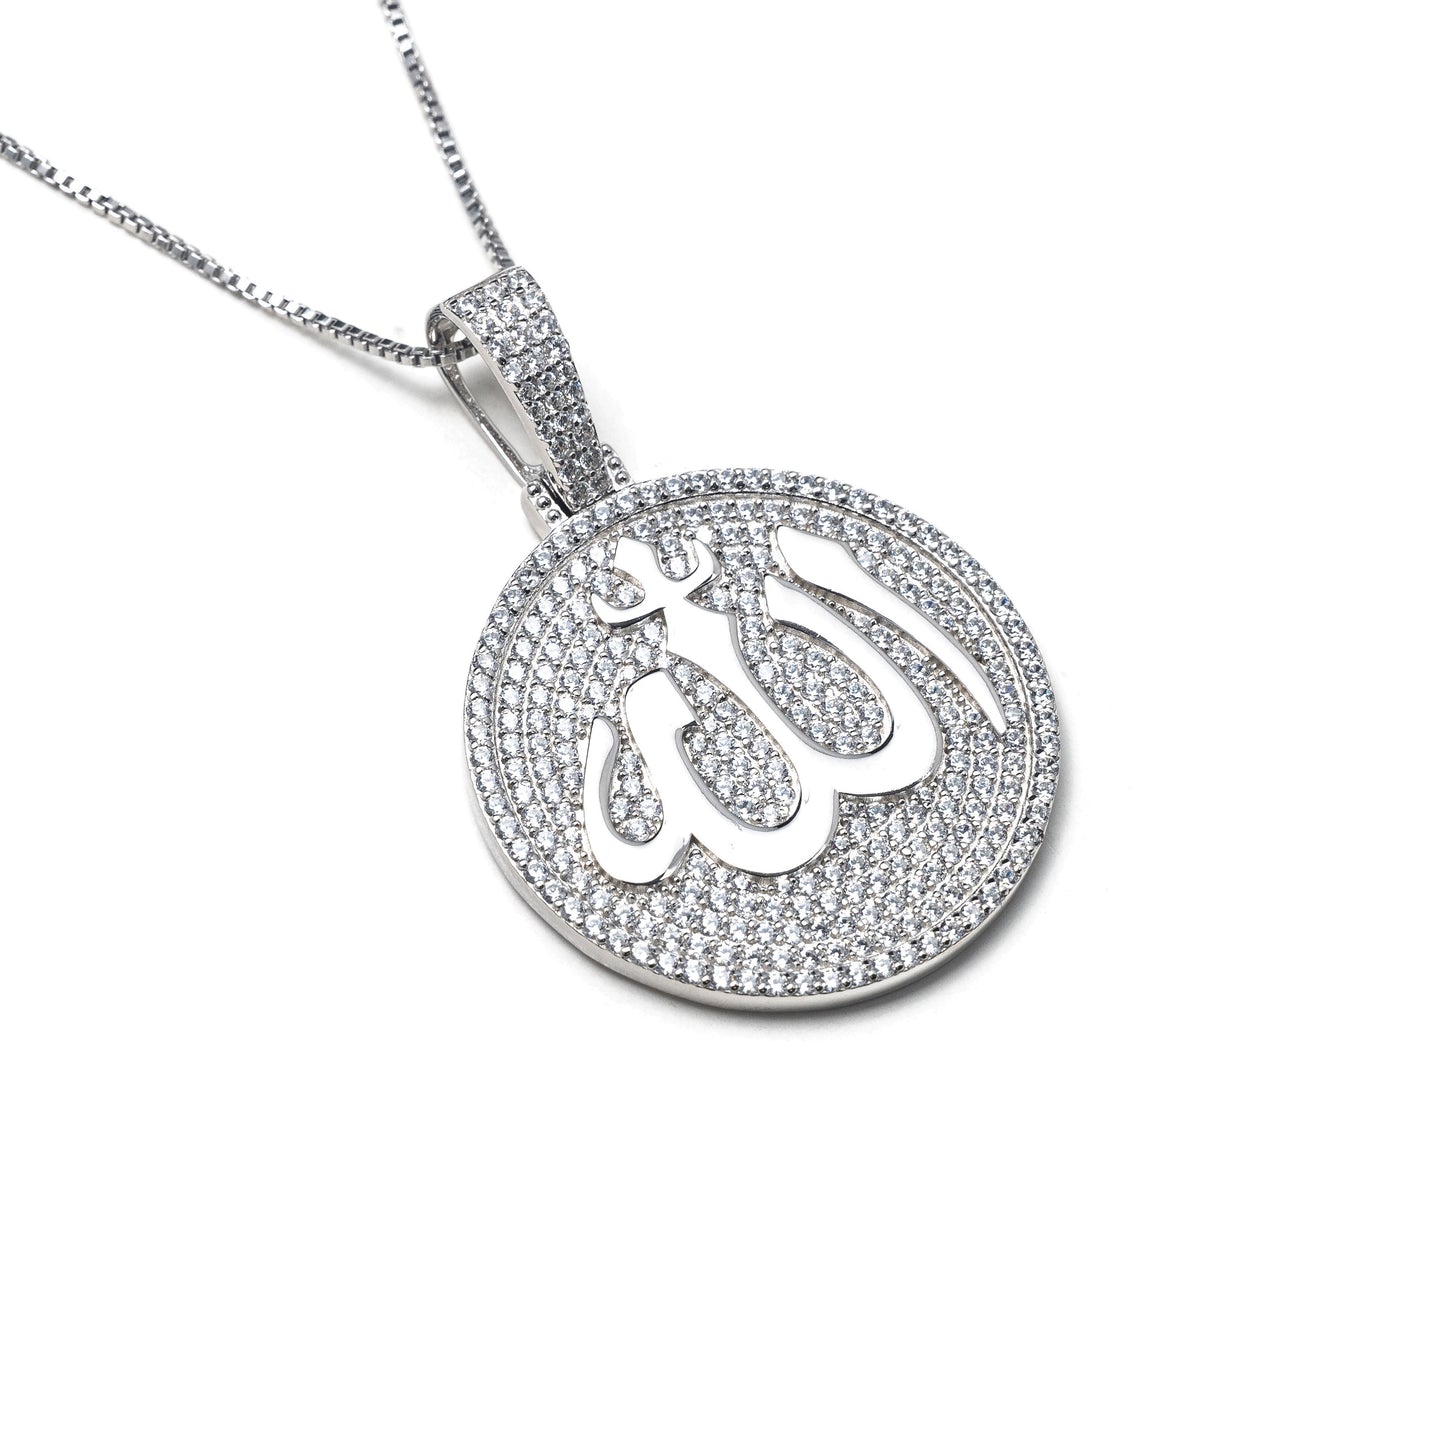 ICY ALLAH MEDALLION NECKLACE